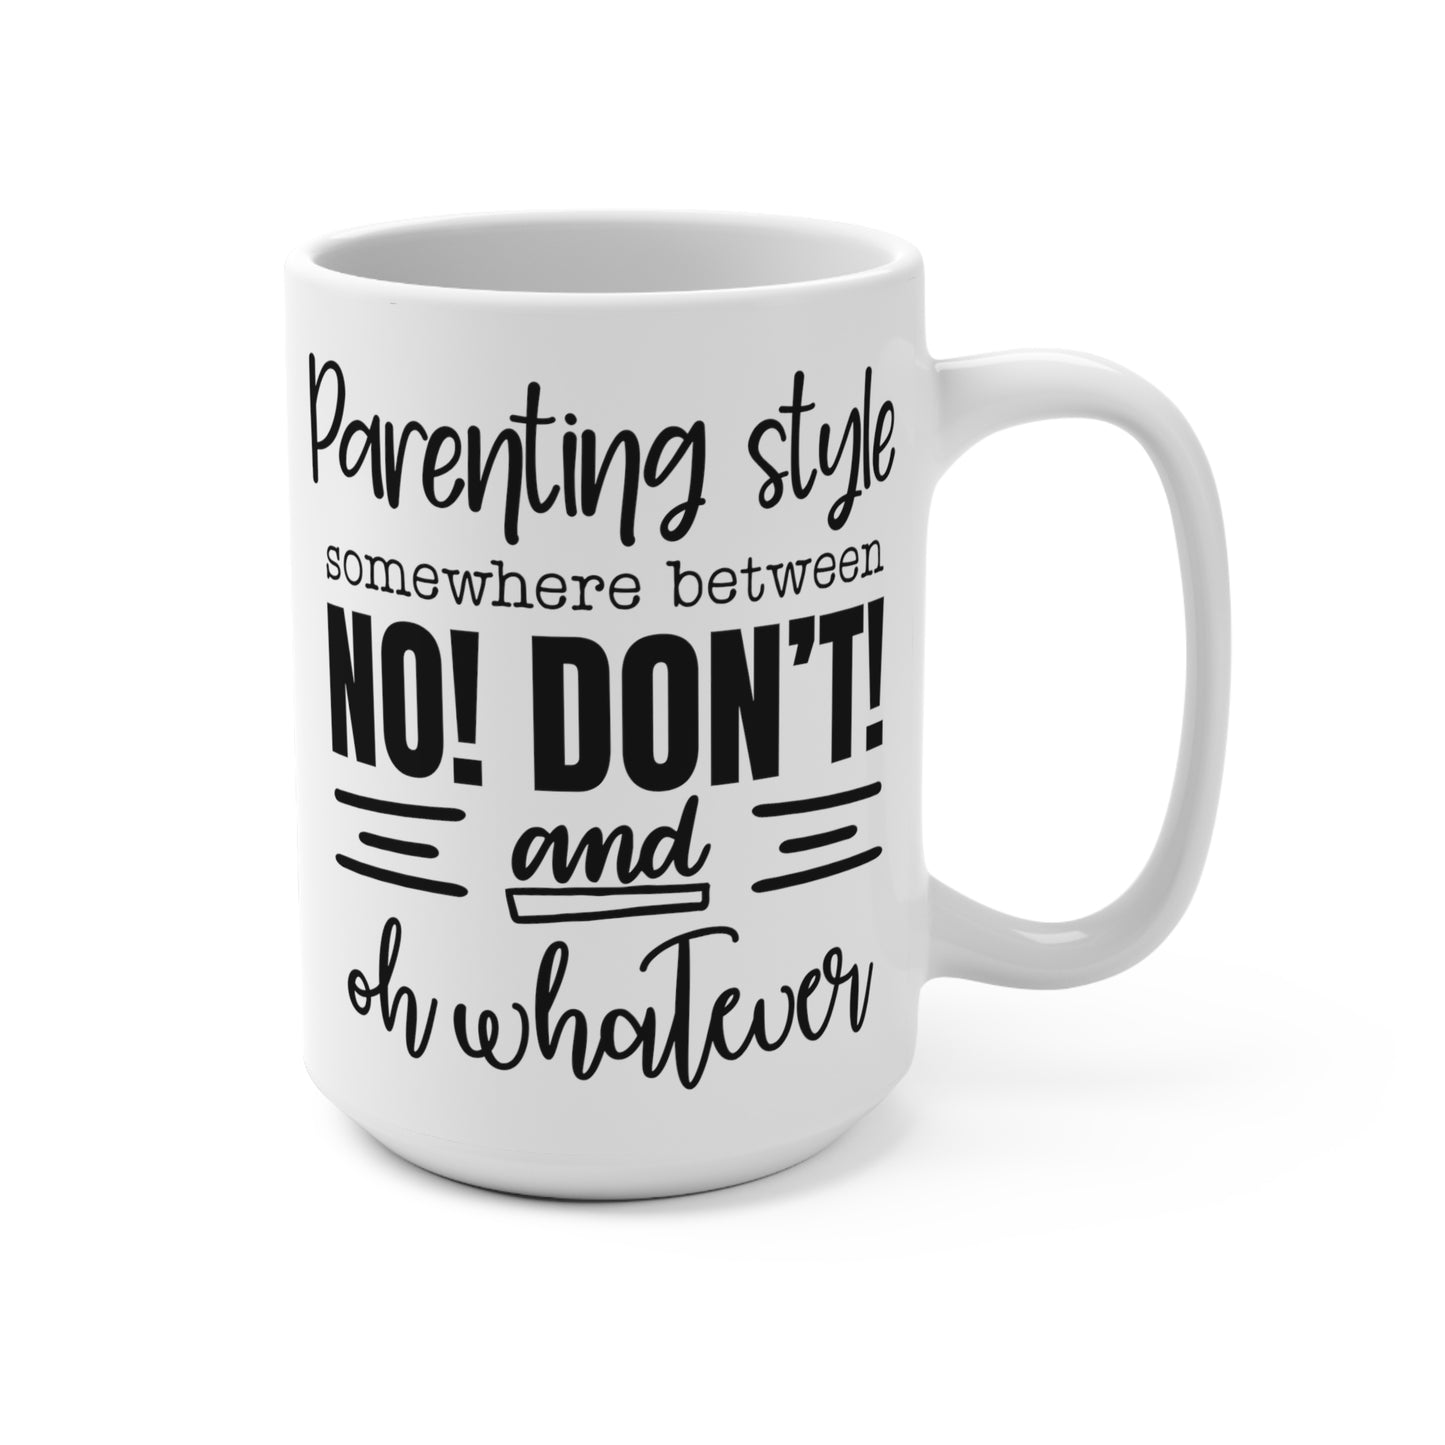 Funny Parenting Mug, Parenting Style Quote, Black and White Coffee Cup, Humorous Gift for Parents, Mum Dad Mugs, Sarcastic Drinkware